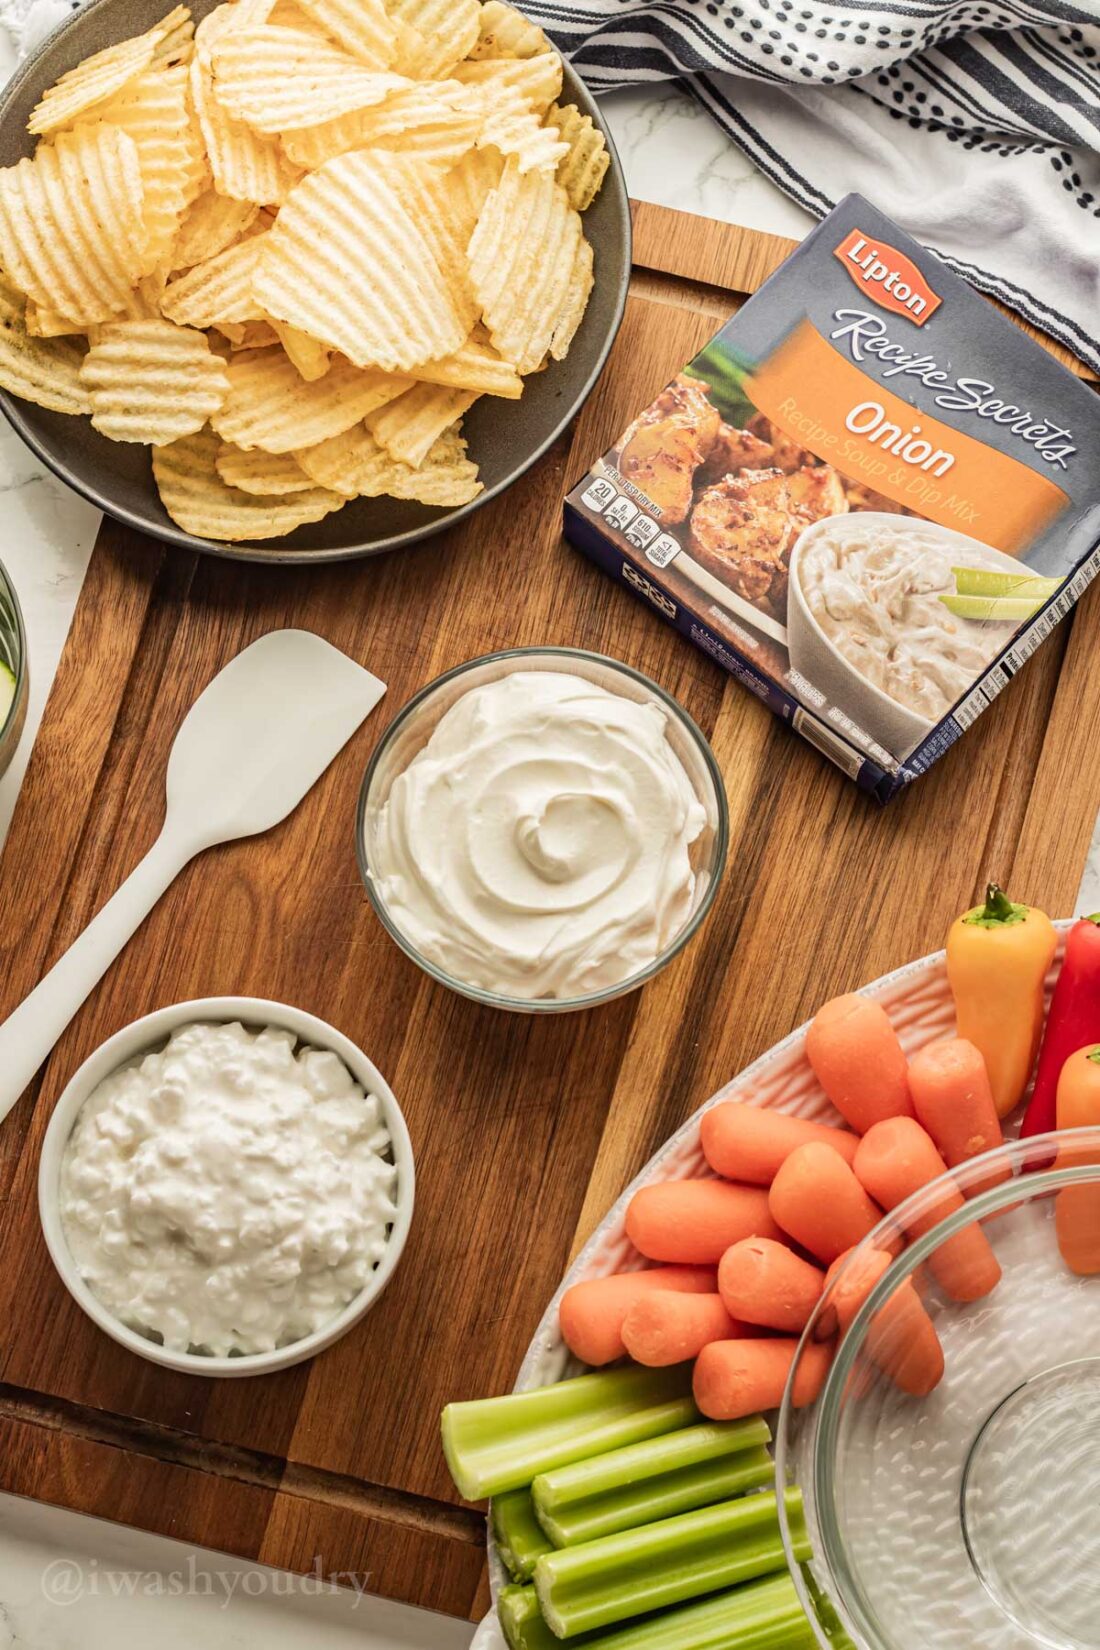 ingredients for creamy onion dip on wooden surface with chips and veggies.